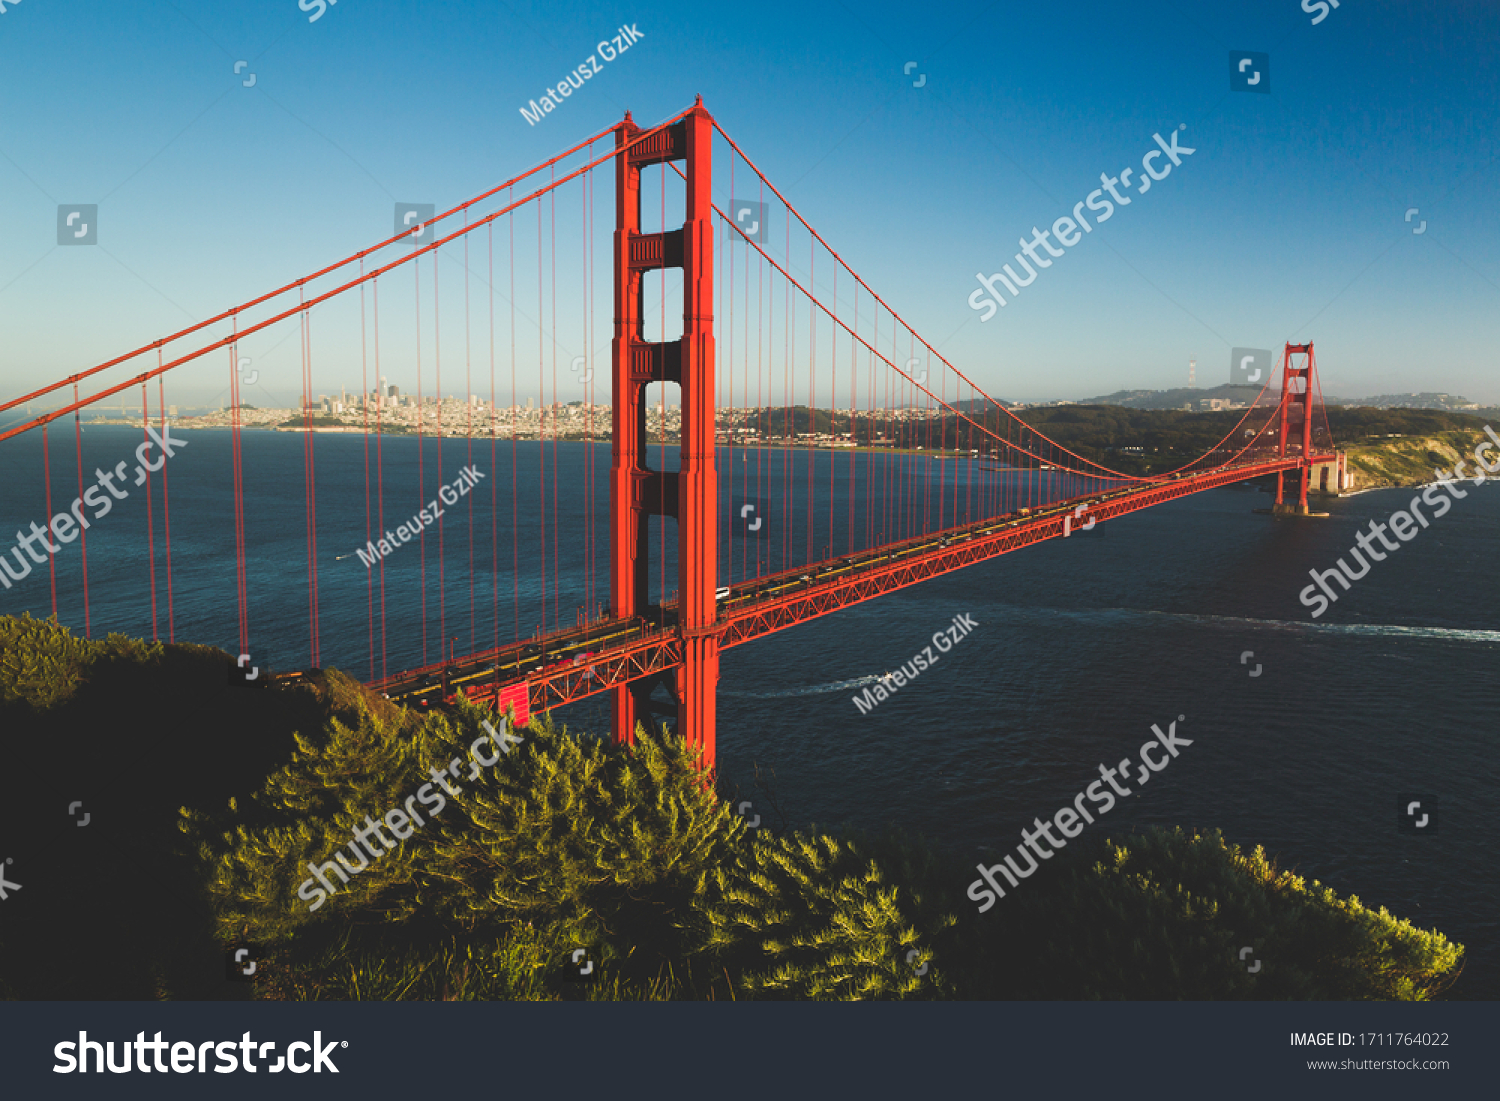 Golden Gate Bridge - connecting San Francisco with Marin County #1711764022